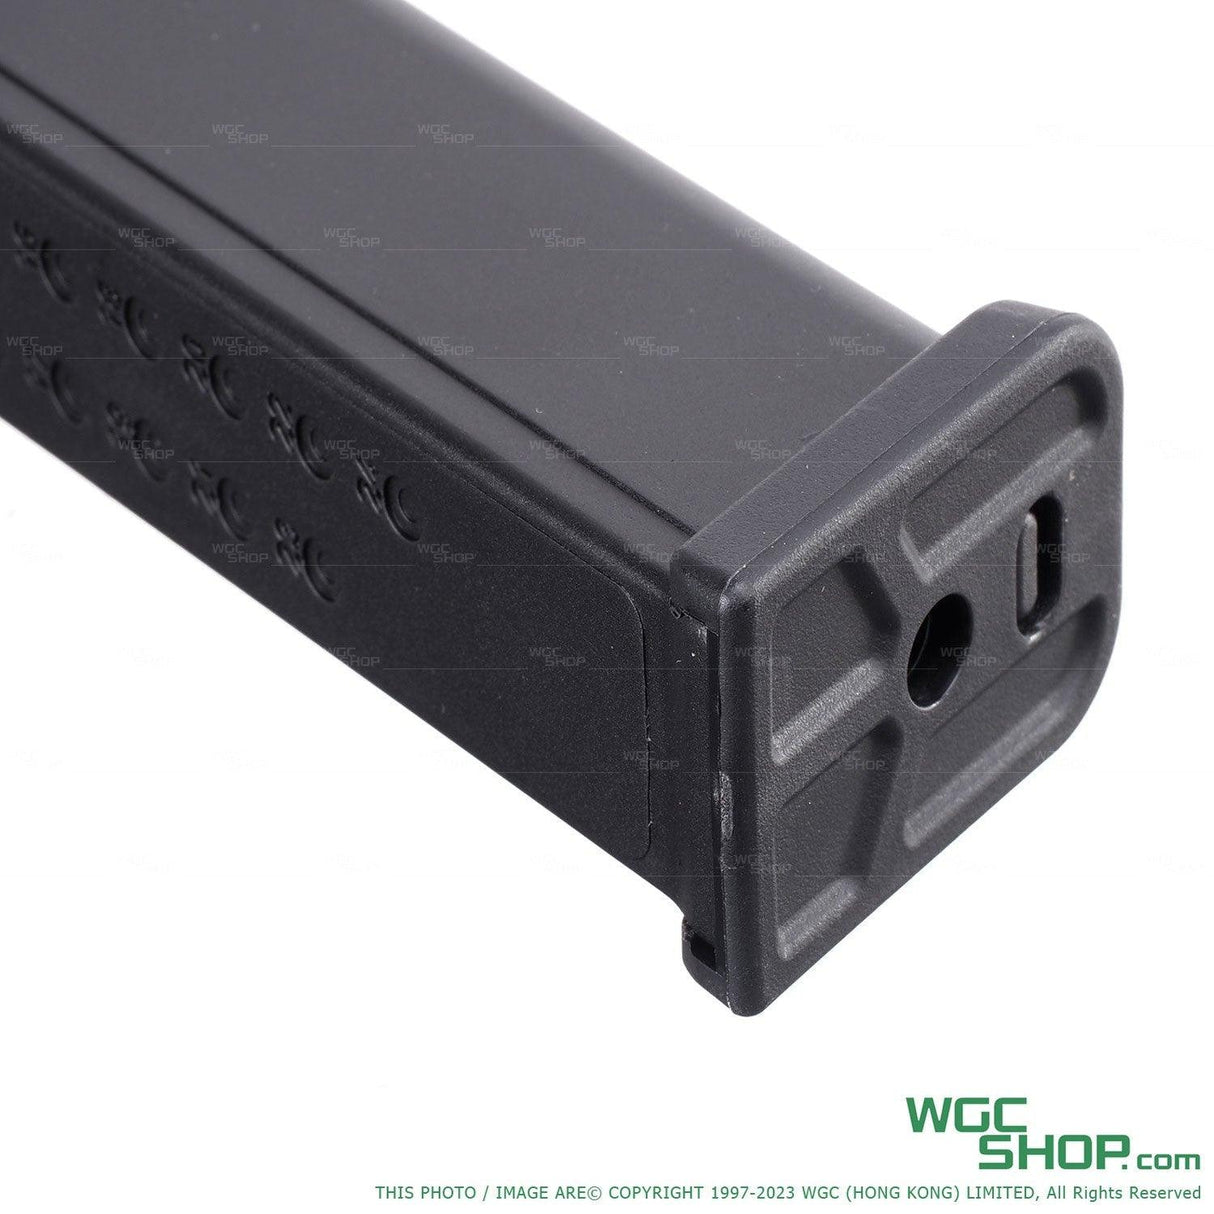 MAXTACT GMG-17 32Rds Lightweight Gas Airsoft Magazine for Marui Spec G-Series GBB Series - WGC Shop